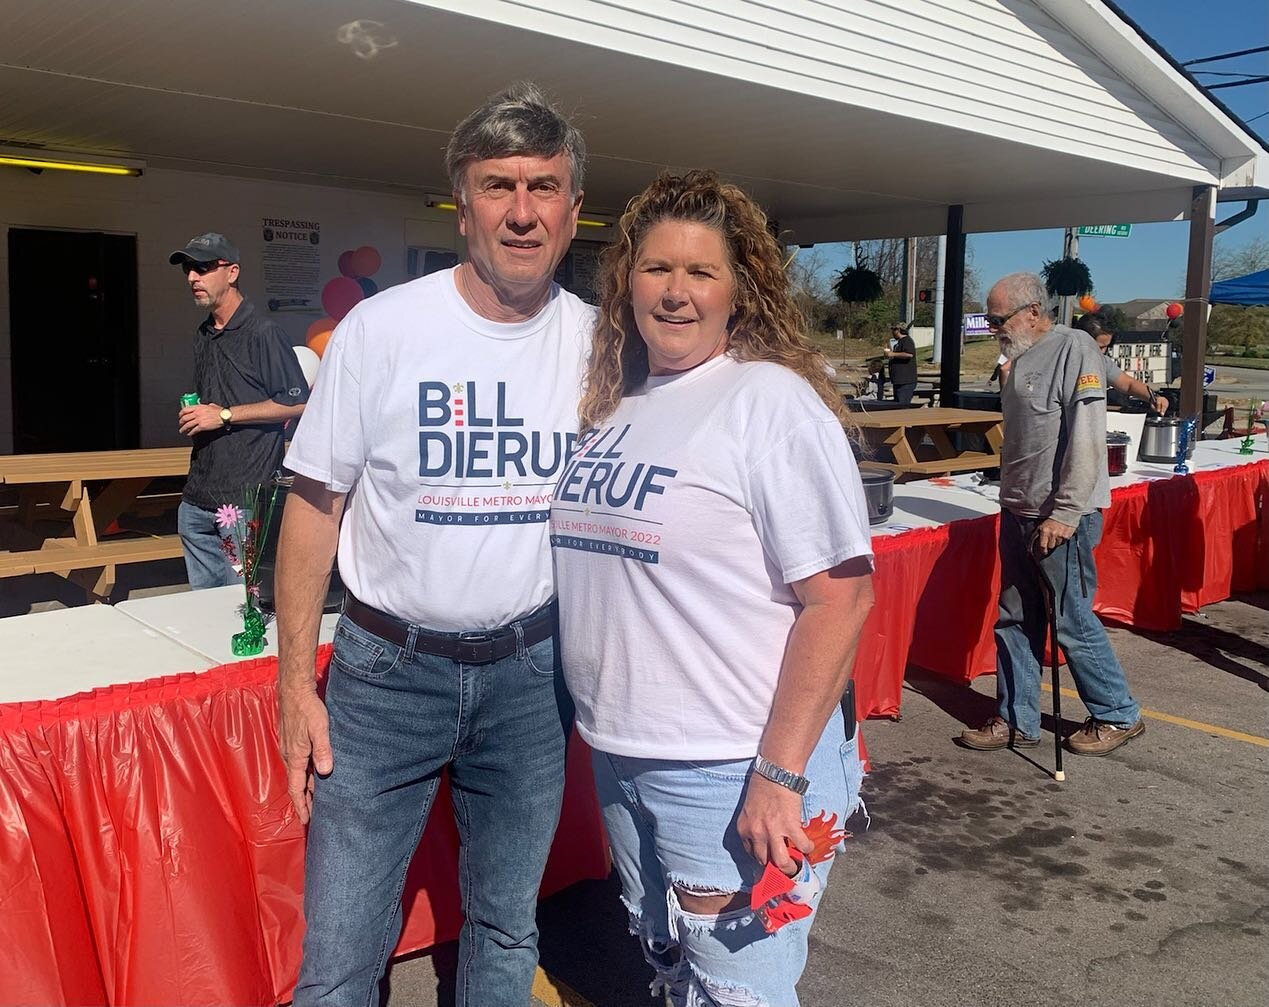 Classic cars and delicious chili made the right combination for a great event at the Valley Dairy Freeze! It also was a successful fundraiser for the recently formed Valley Station Community Council, which was raising money for its Light Up Valley St